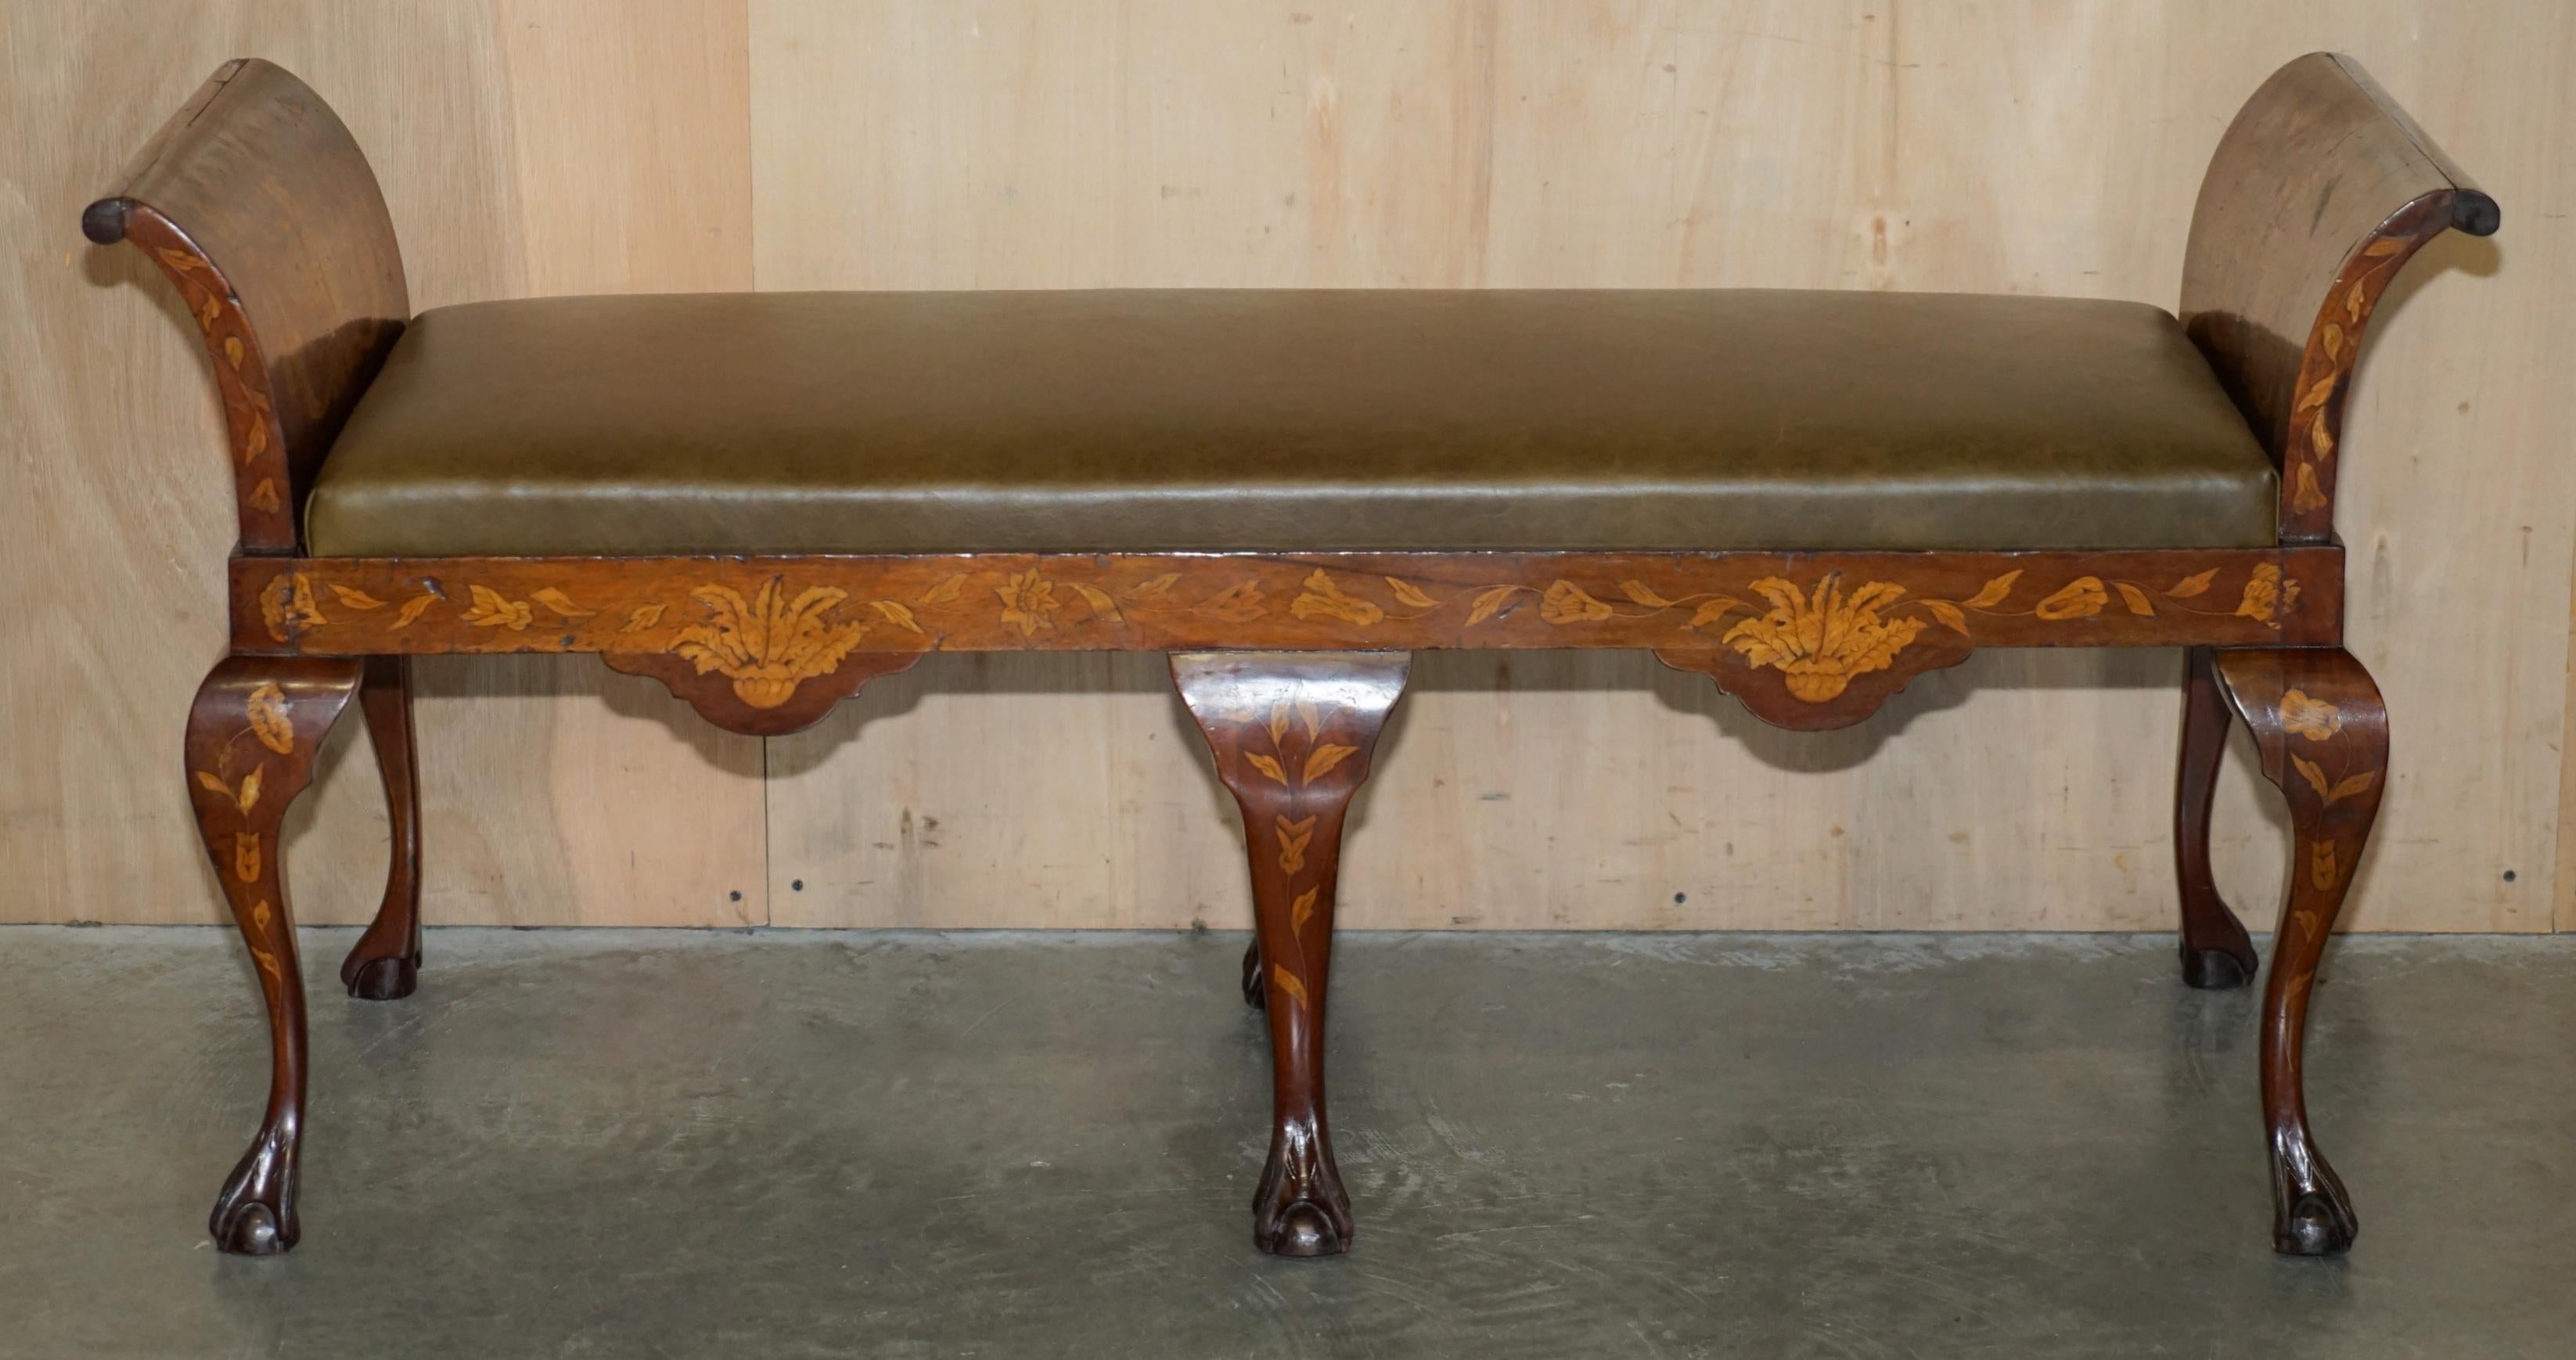 Royal House Antiques

Royal House Antiques is delighted to offer for sale this very fine highly collectable antique circa 1860 Dutch Marquetry inlaid, Claw & Ball feet, brown leather seat pad, window seat of bench 

Please note the delivery fee